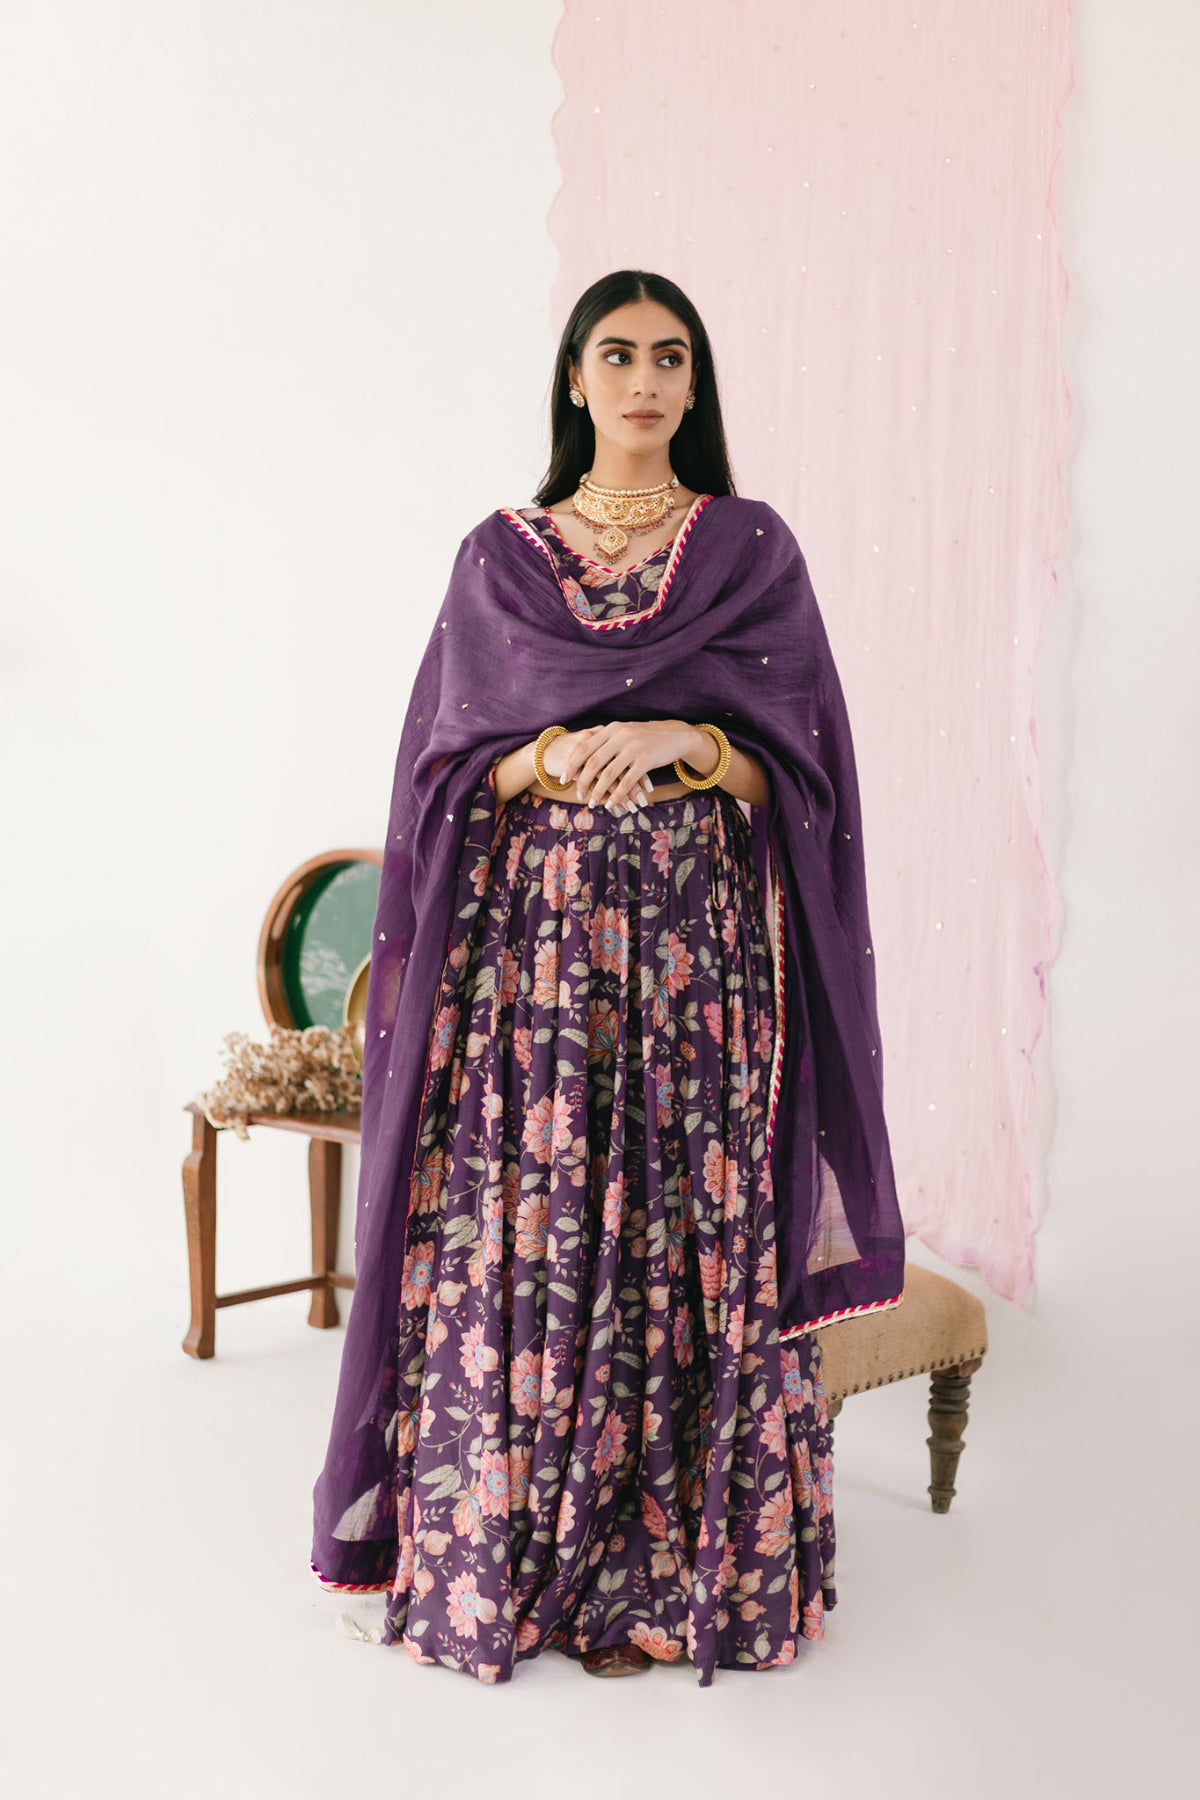 Purple Floral print Lehenga with Floral print Blouse and Dupatta - set of 3